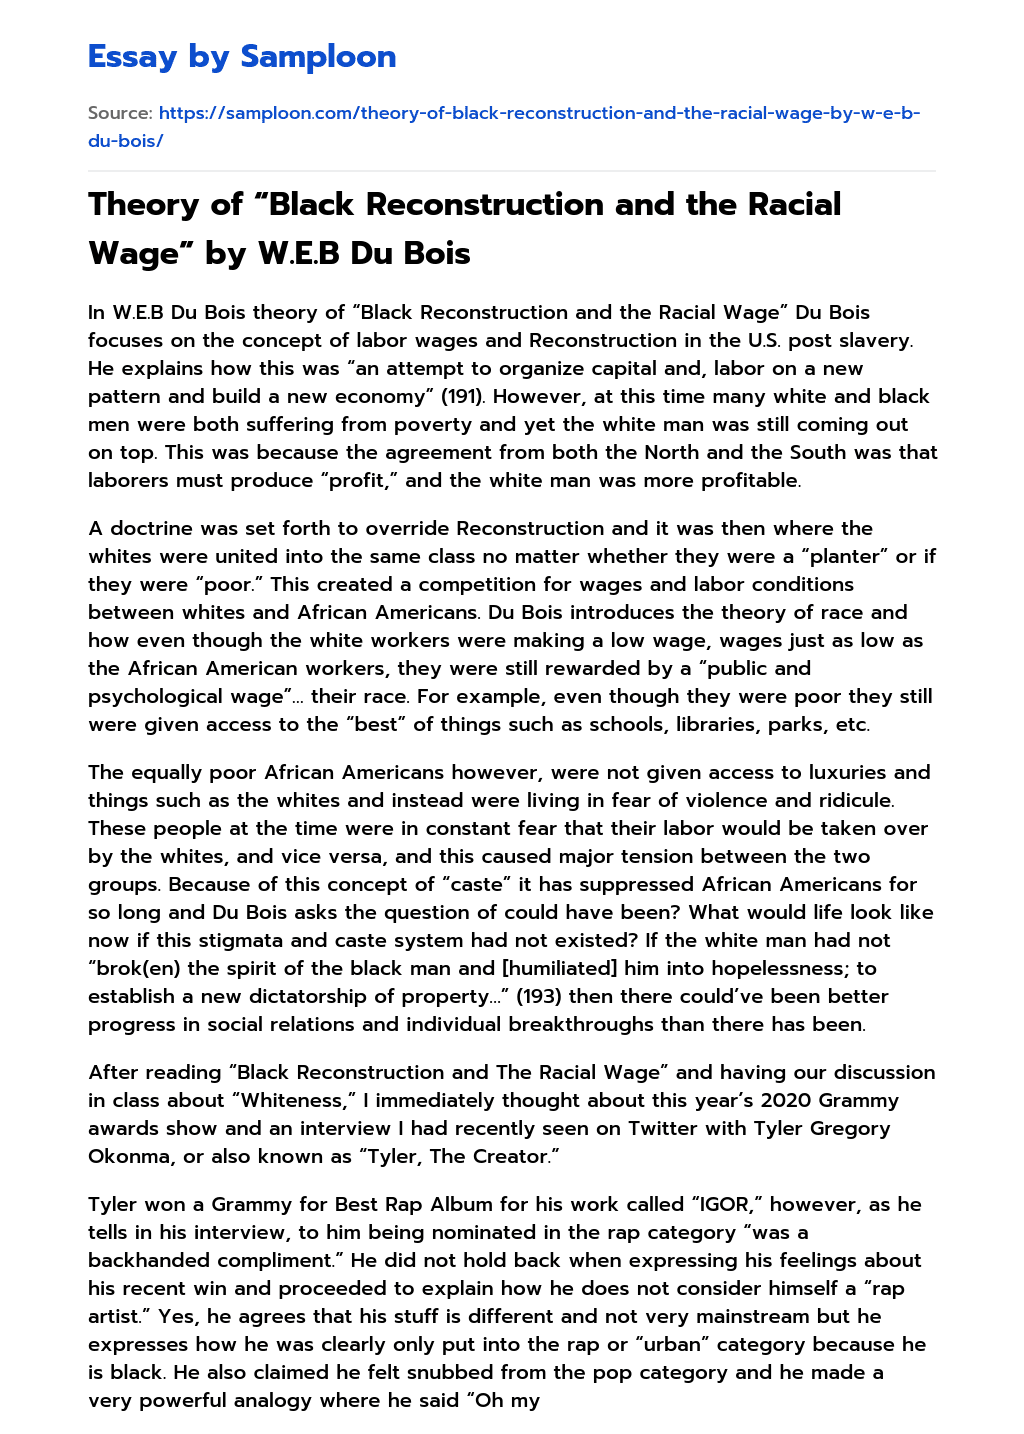 Theory of “Black Reconstruction and the Racial Wage” by W.E.B Du Bois essay